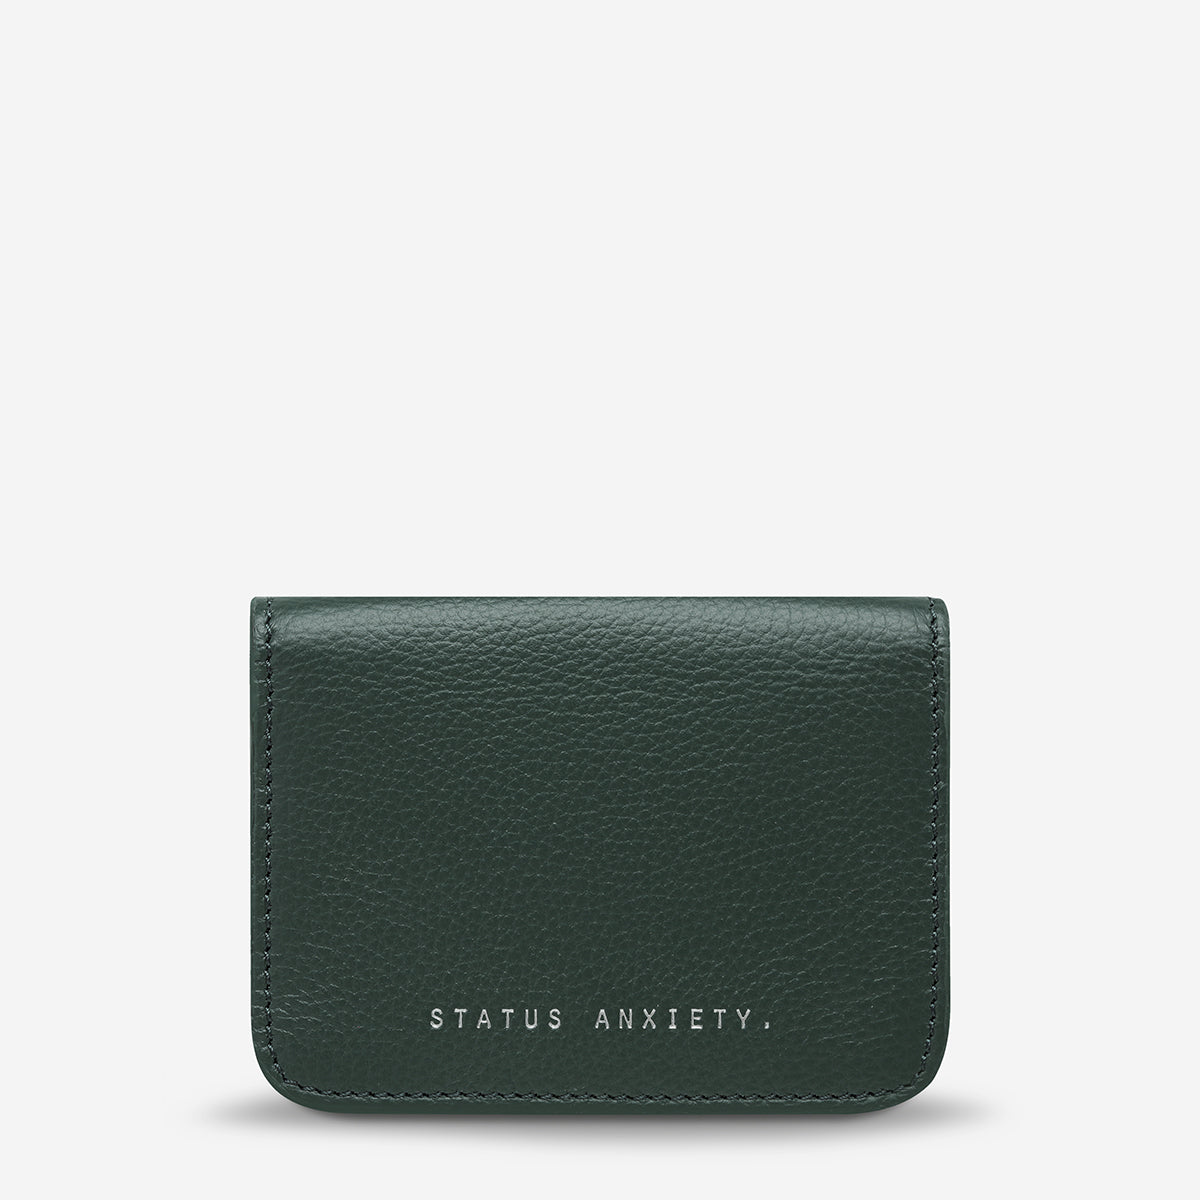 Status Anxiety Miles Away Women's Leather Wallet Teal